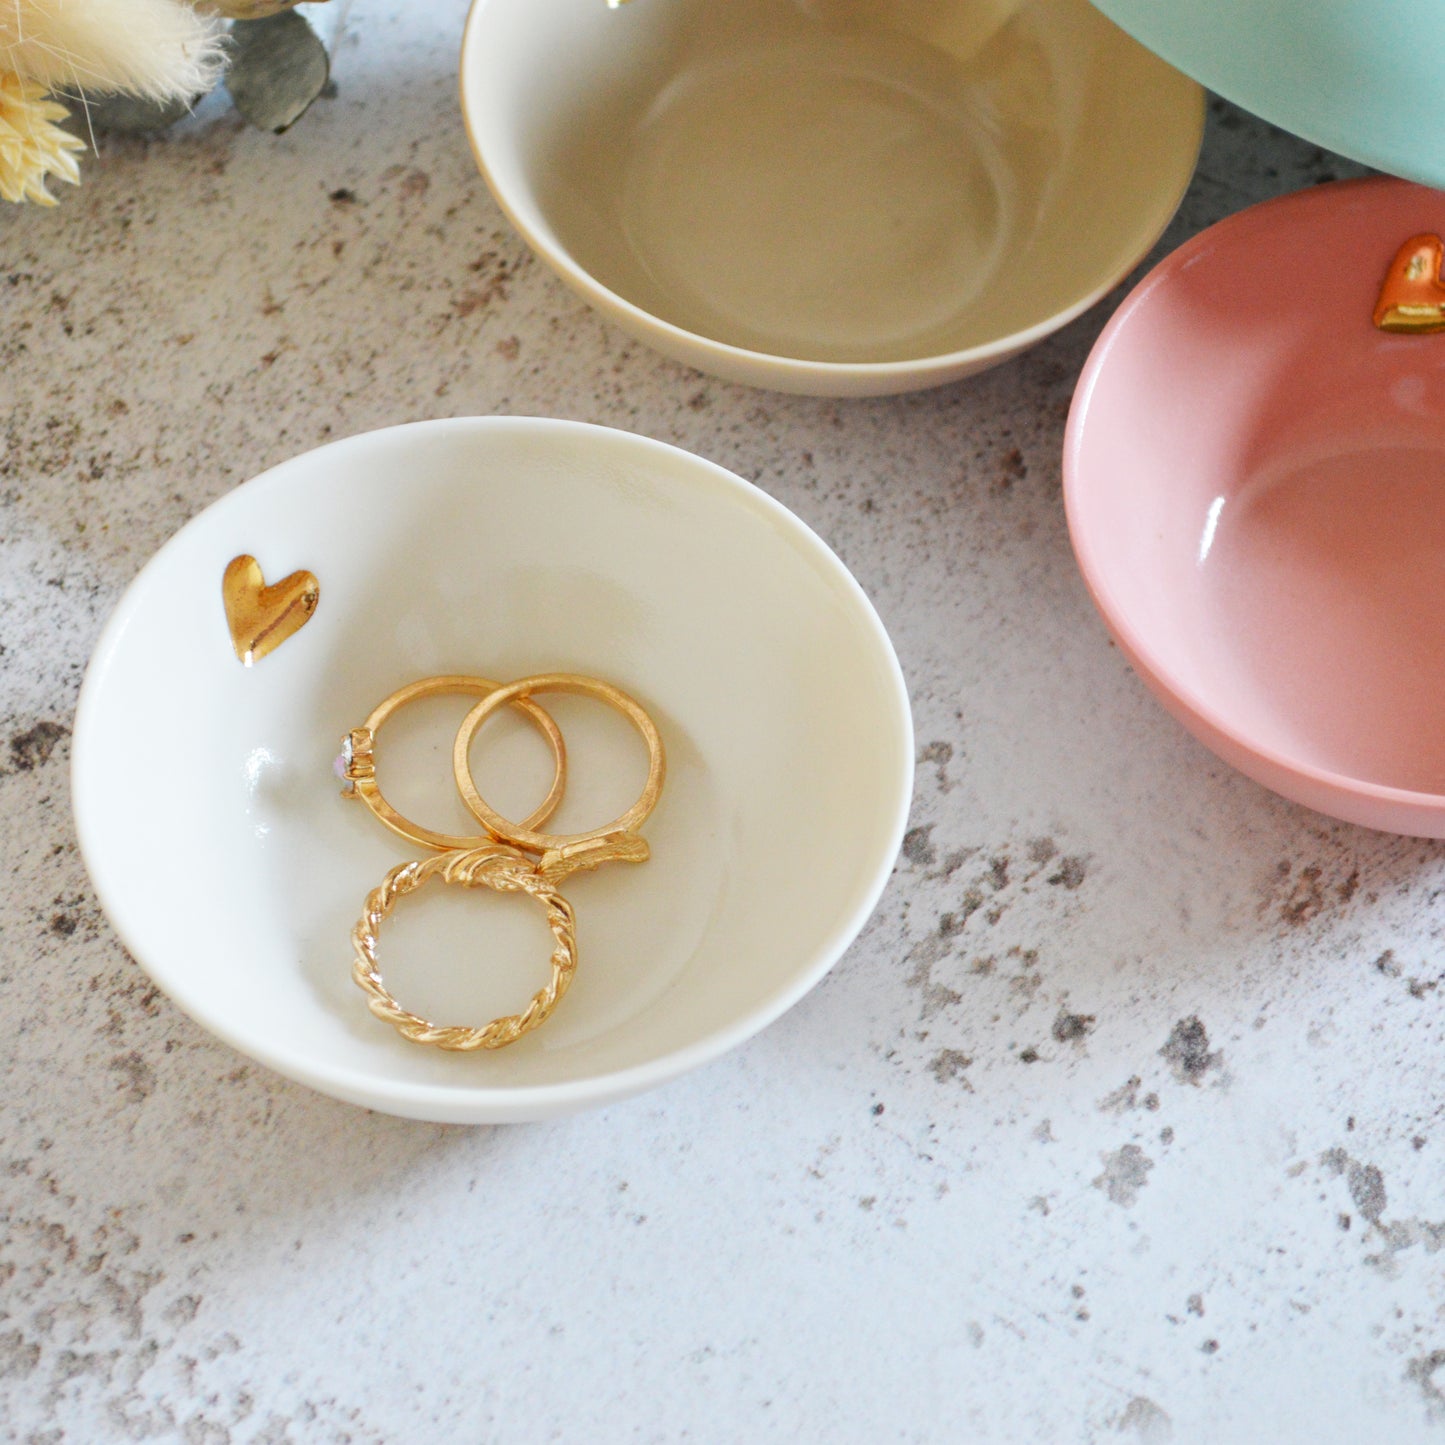 Small Trinket/Ring Dish With A Gold Embossed Heart | Ring Dish | Jewellery | Porcelain